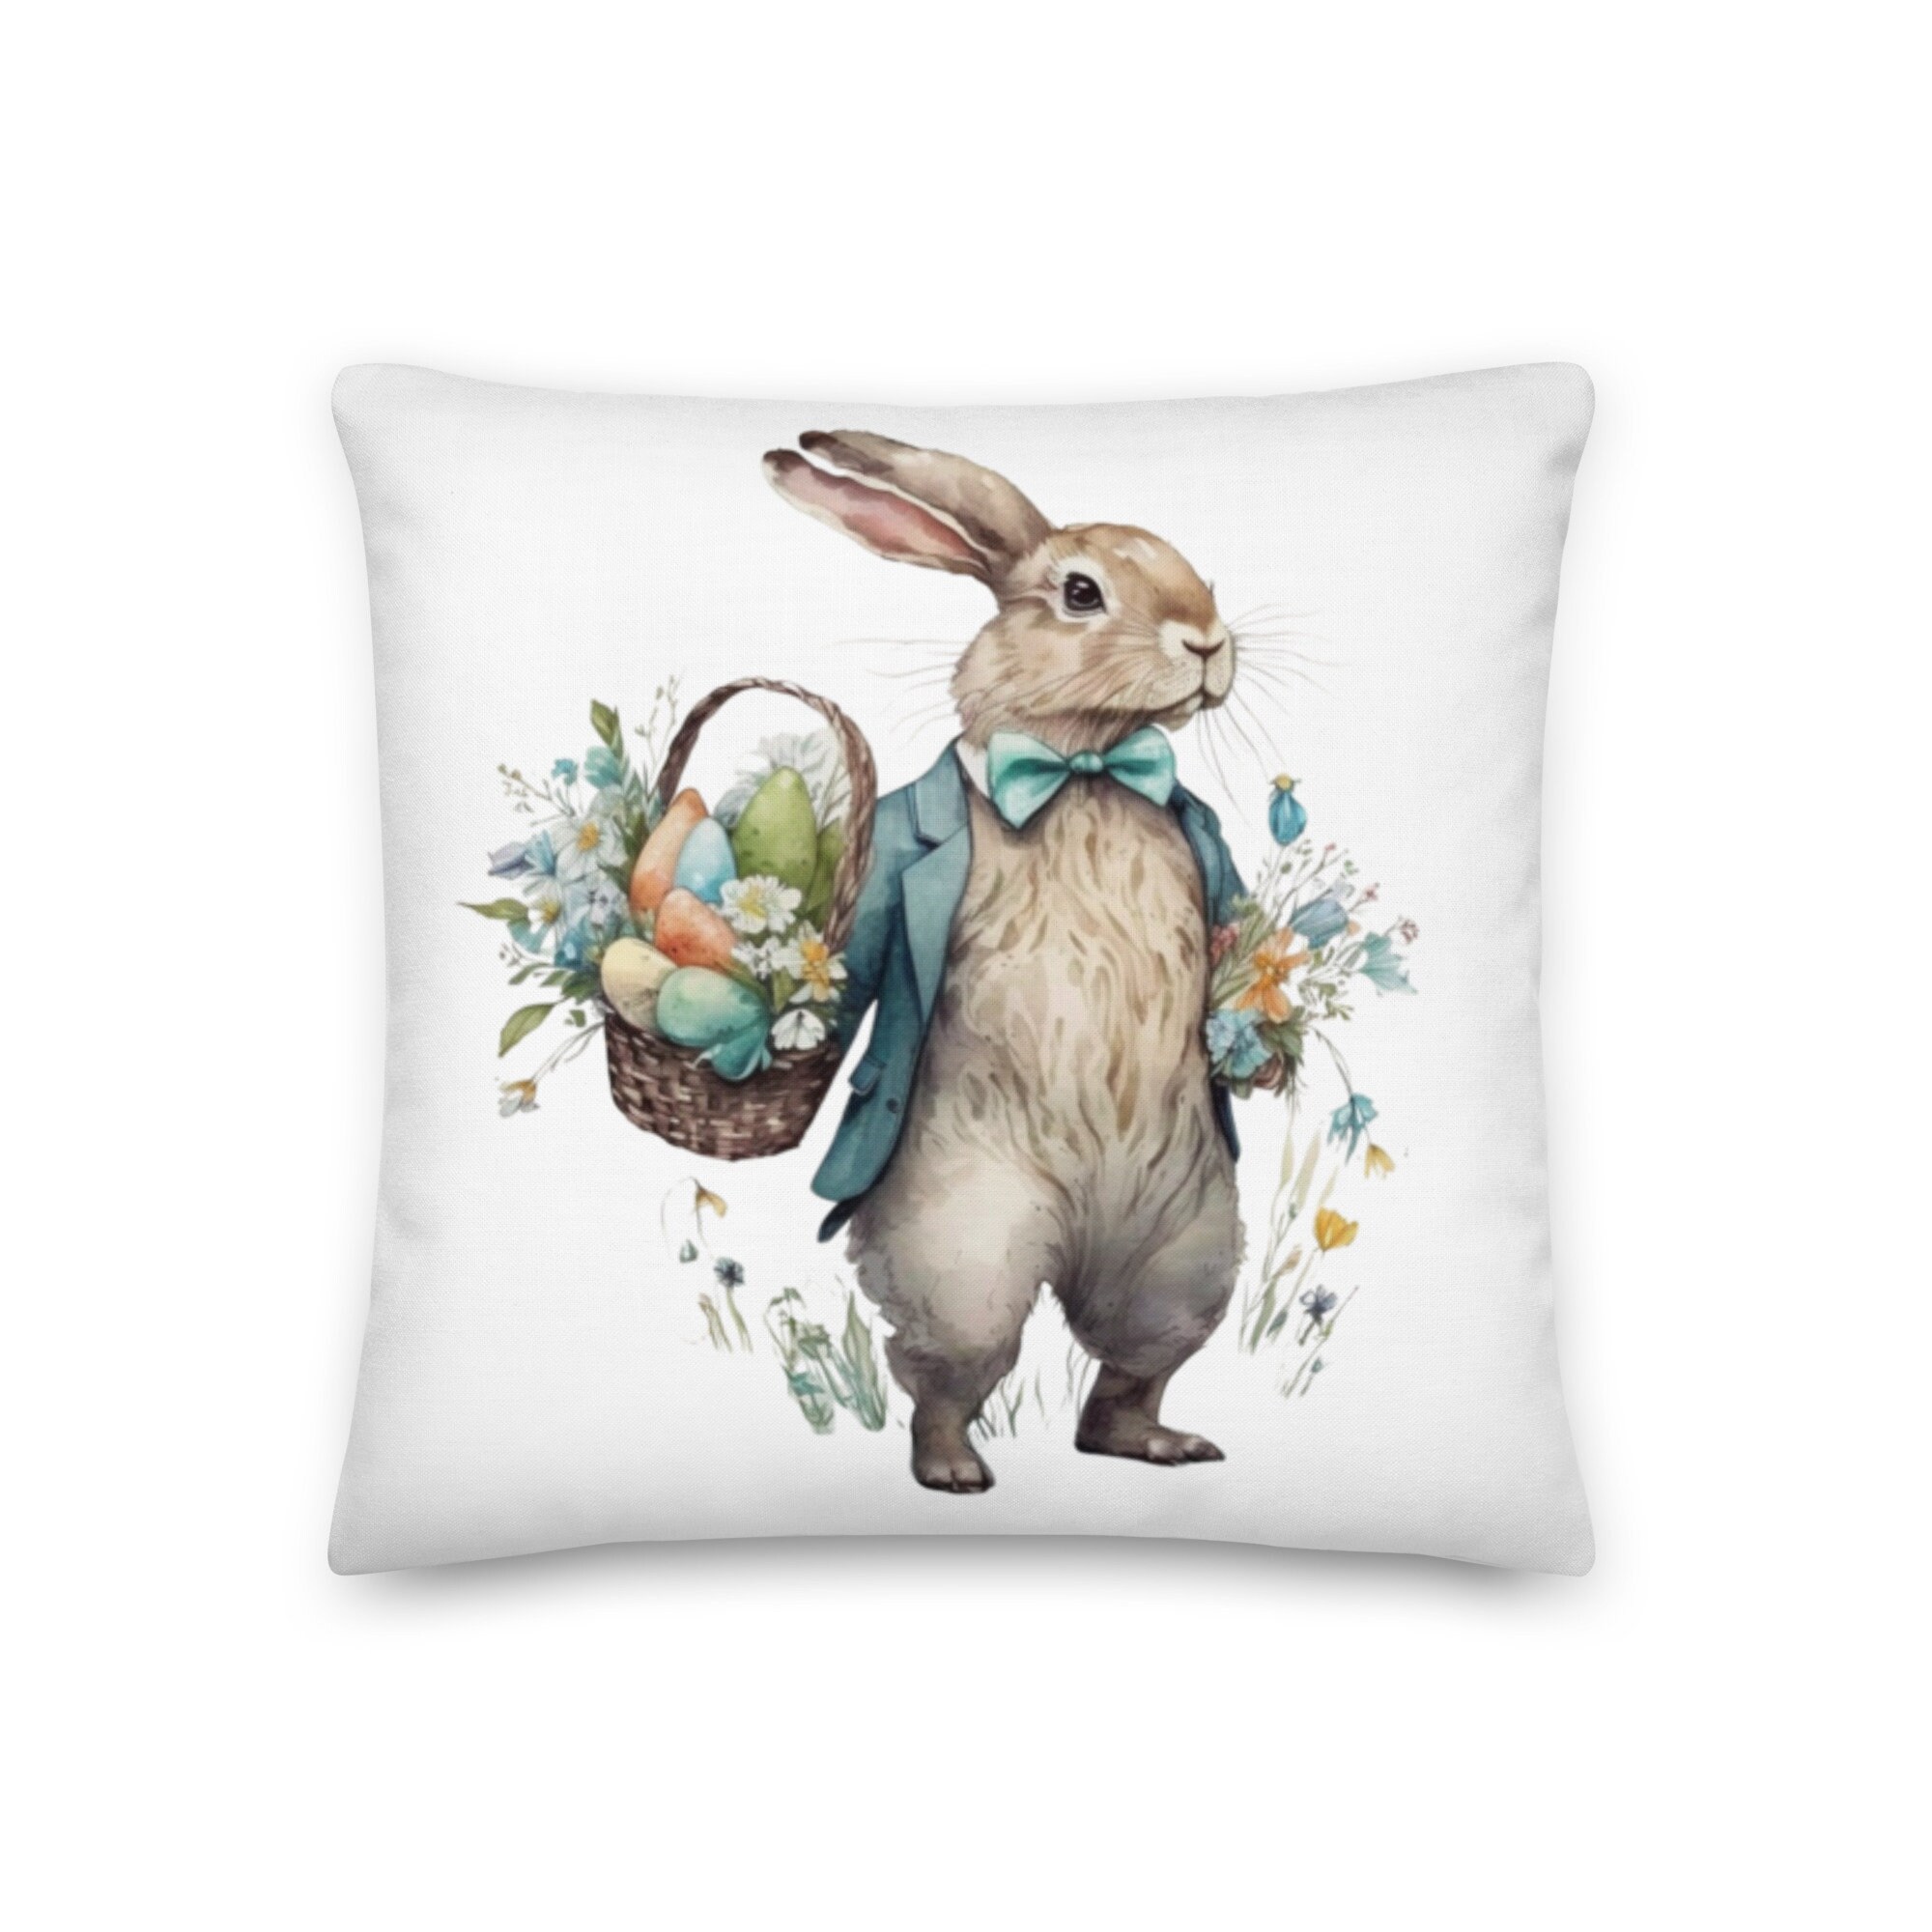 DIY Easter Bunny No Sew Pillow Using Iron On Fabric Sheets